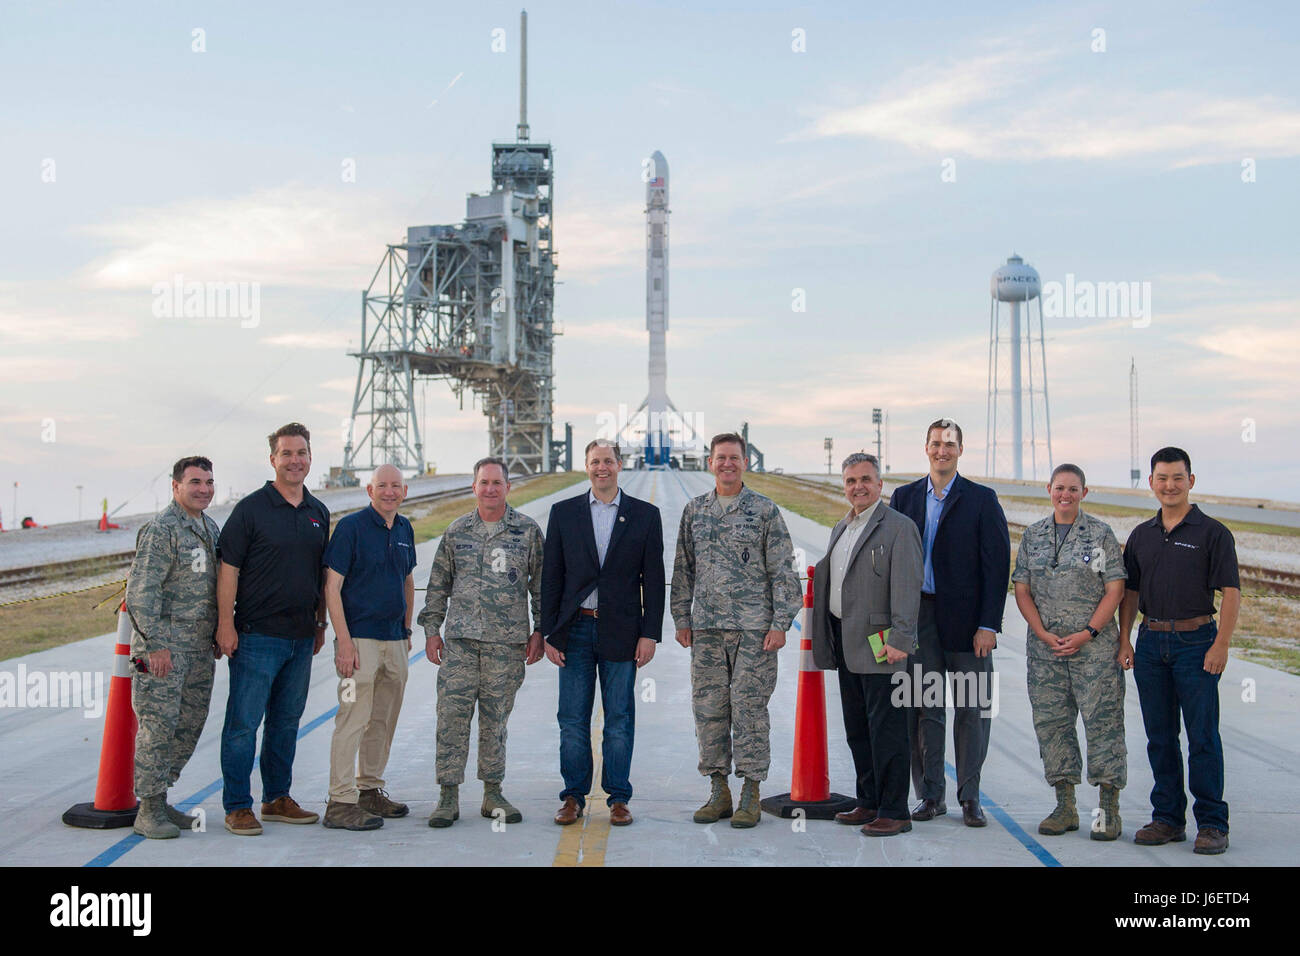 (Fourth from the left) Air Force Chief of Staff Gen. David L. Goldfein; Rep. Jim Bridenstine; Brig. Gen. Wayne Monteith, 45th Space Wing commander; members of the 45th Space Wing and SpaceX gather for a photo after touring Launch Pad 39A, April 29, 2017, at Kennedy Space Center, Fla. The tour included a visit to the Morrell Operations Center; Cape Canaveral Air Force Station Headquarters; Space Launch Complex 37; Moon Express; and a close up view of the Falcon 9 launch and landing. (U.S. Air Force photo/Matthew Jurgens) Stock Photo